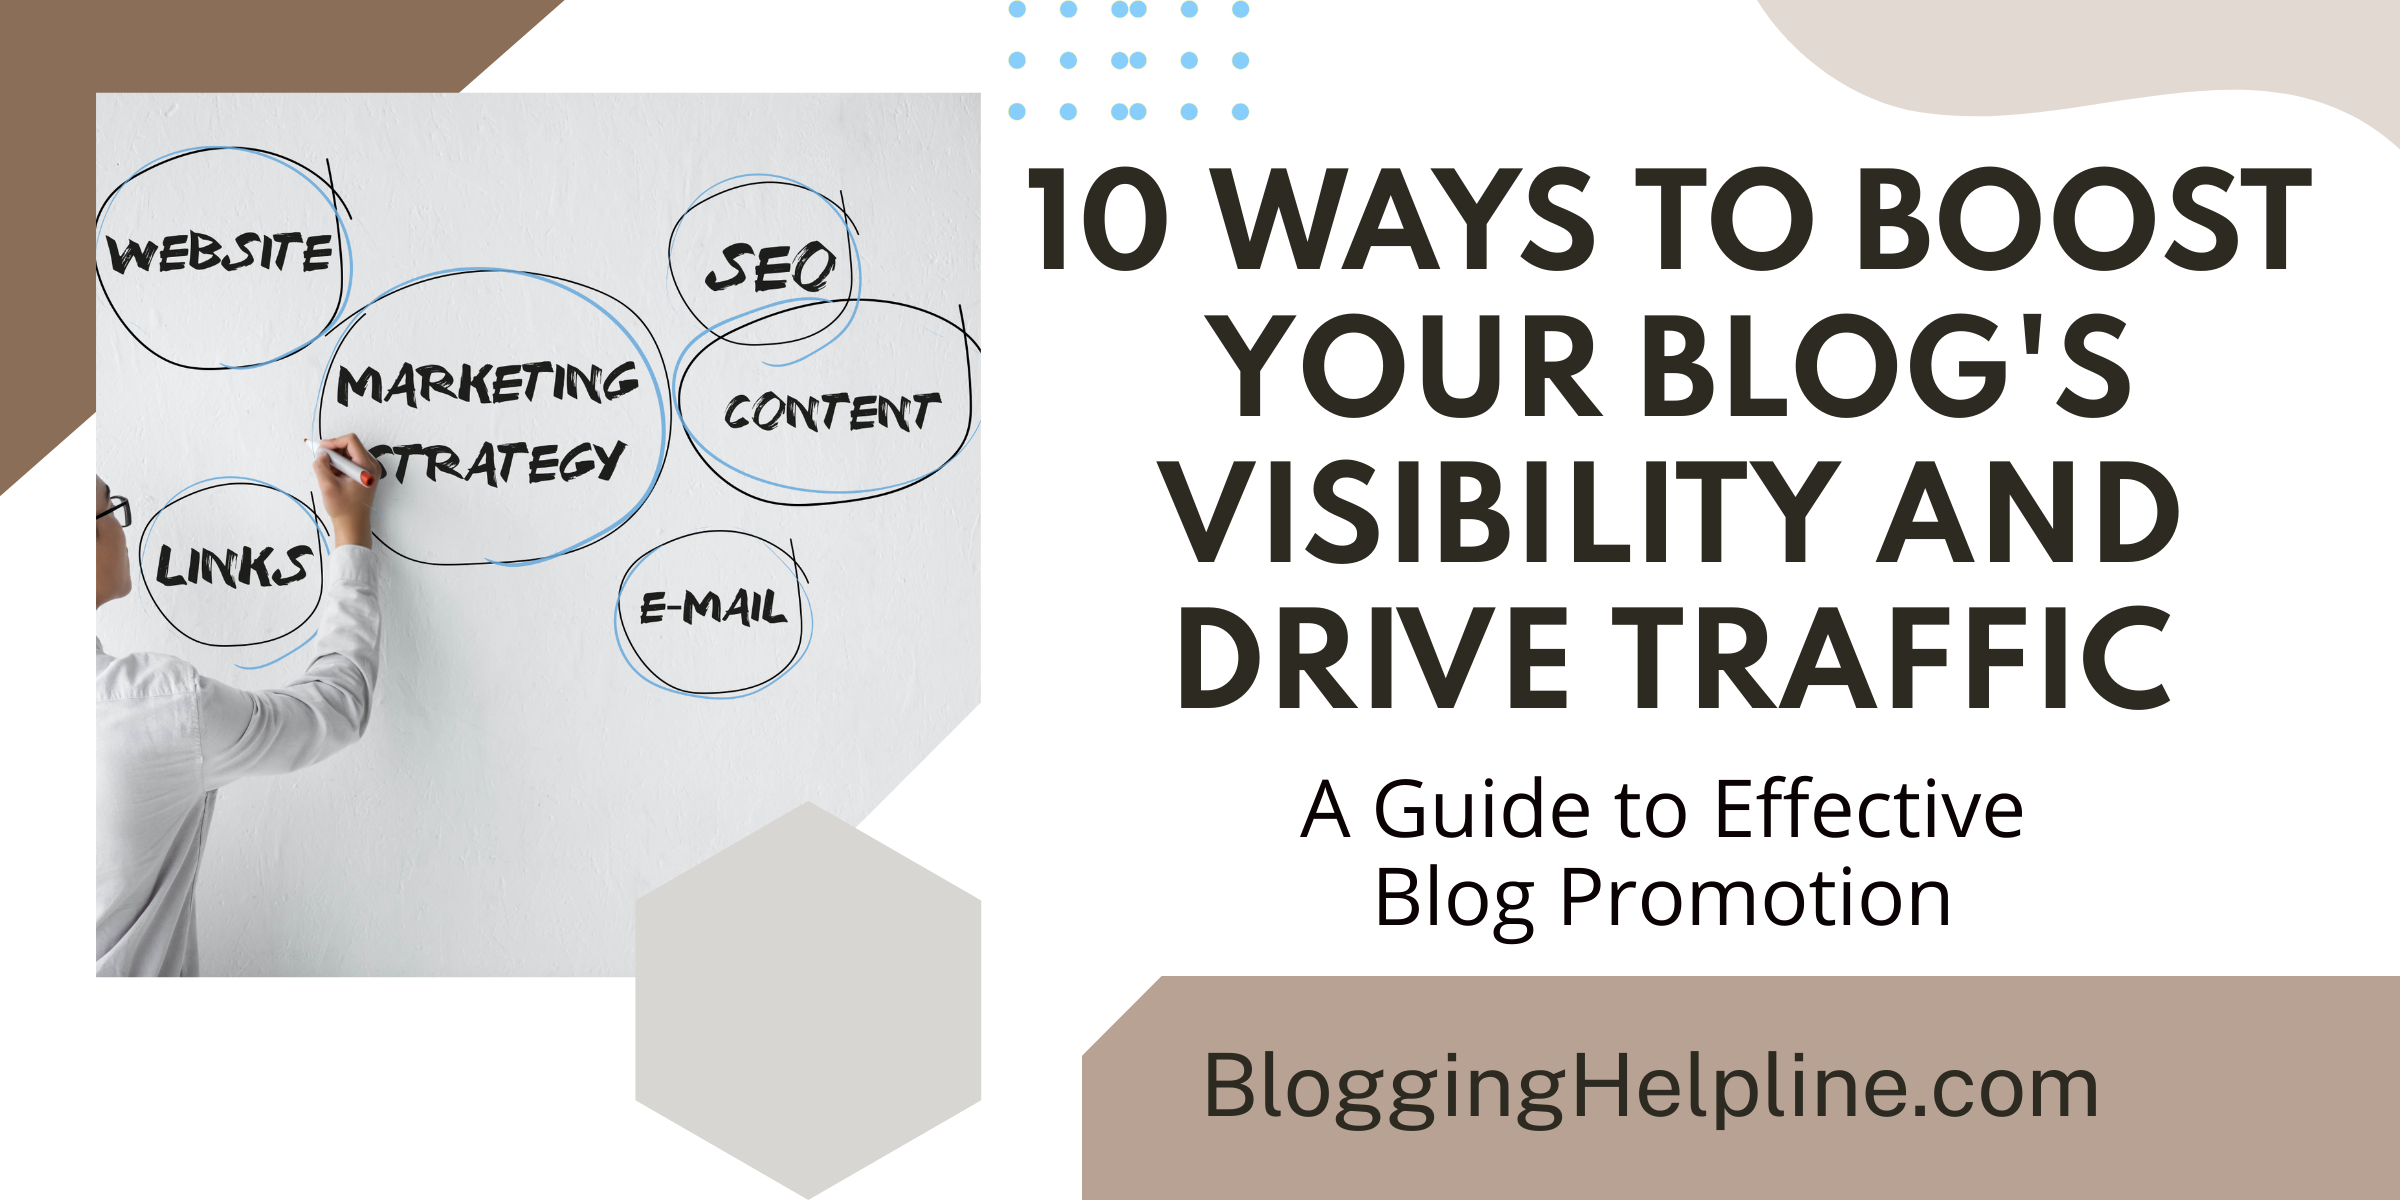 10 Ways to Boost Your Blog's Visibility and Drive Traffic